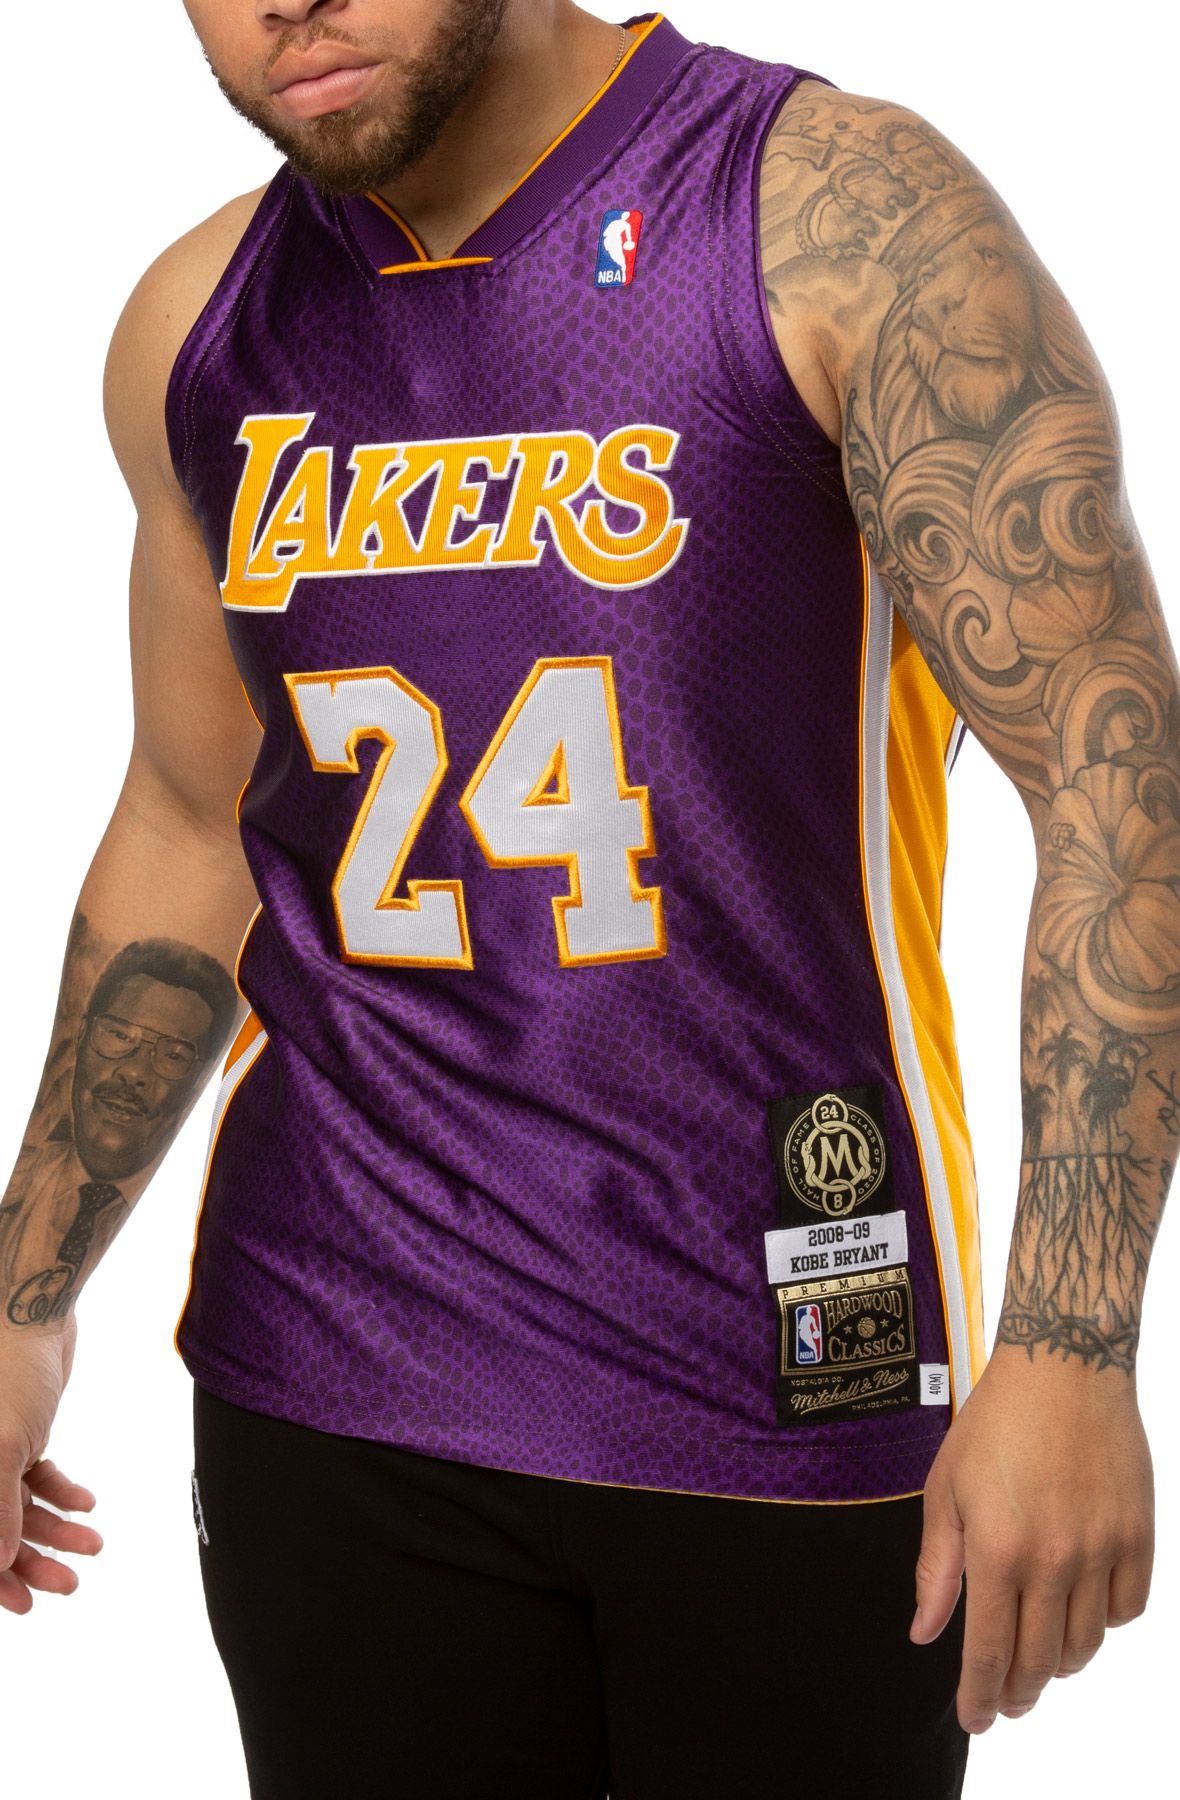 LOS ANGELES LAKERS KOBE BRYANT 8/24 AUTHENTIC REVERSIBLE JERSEY